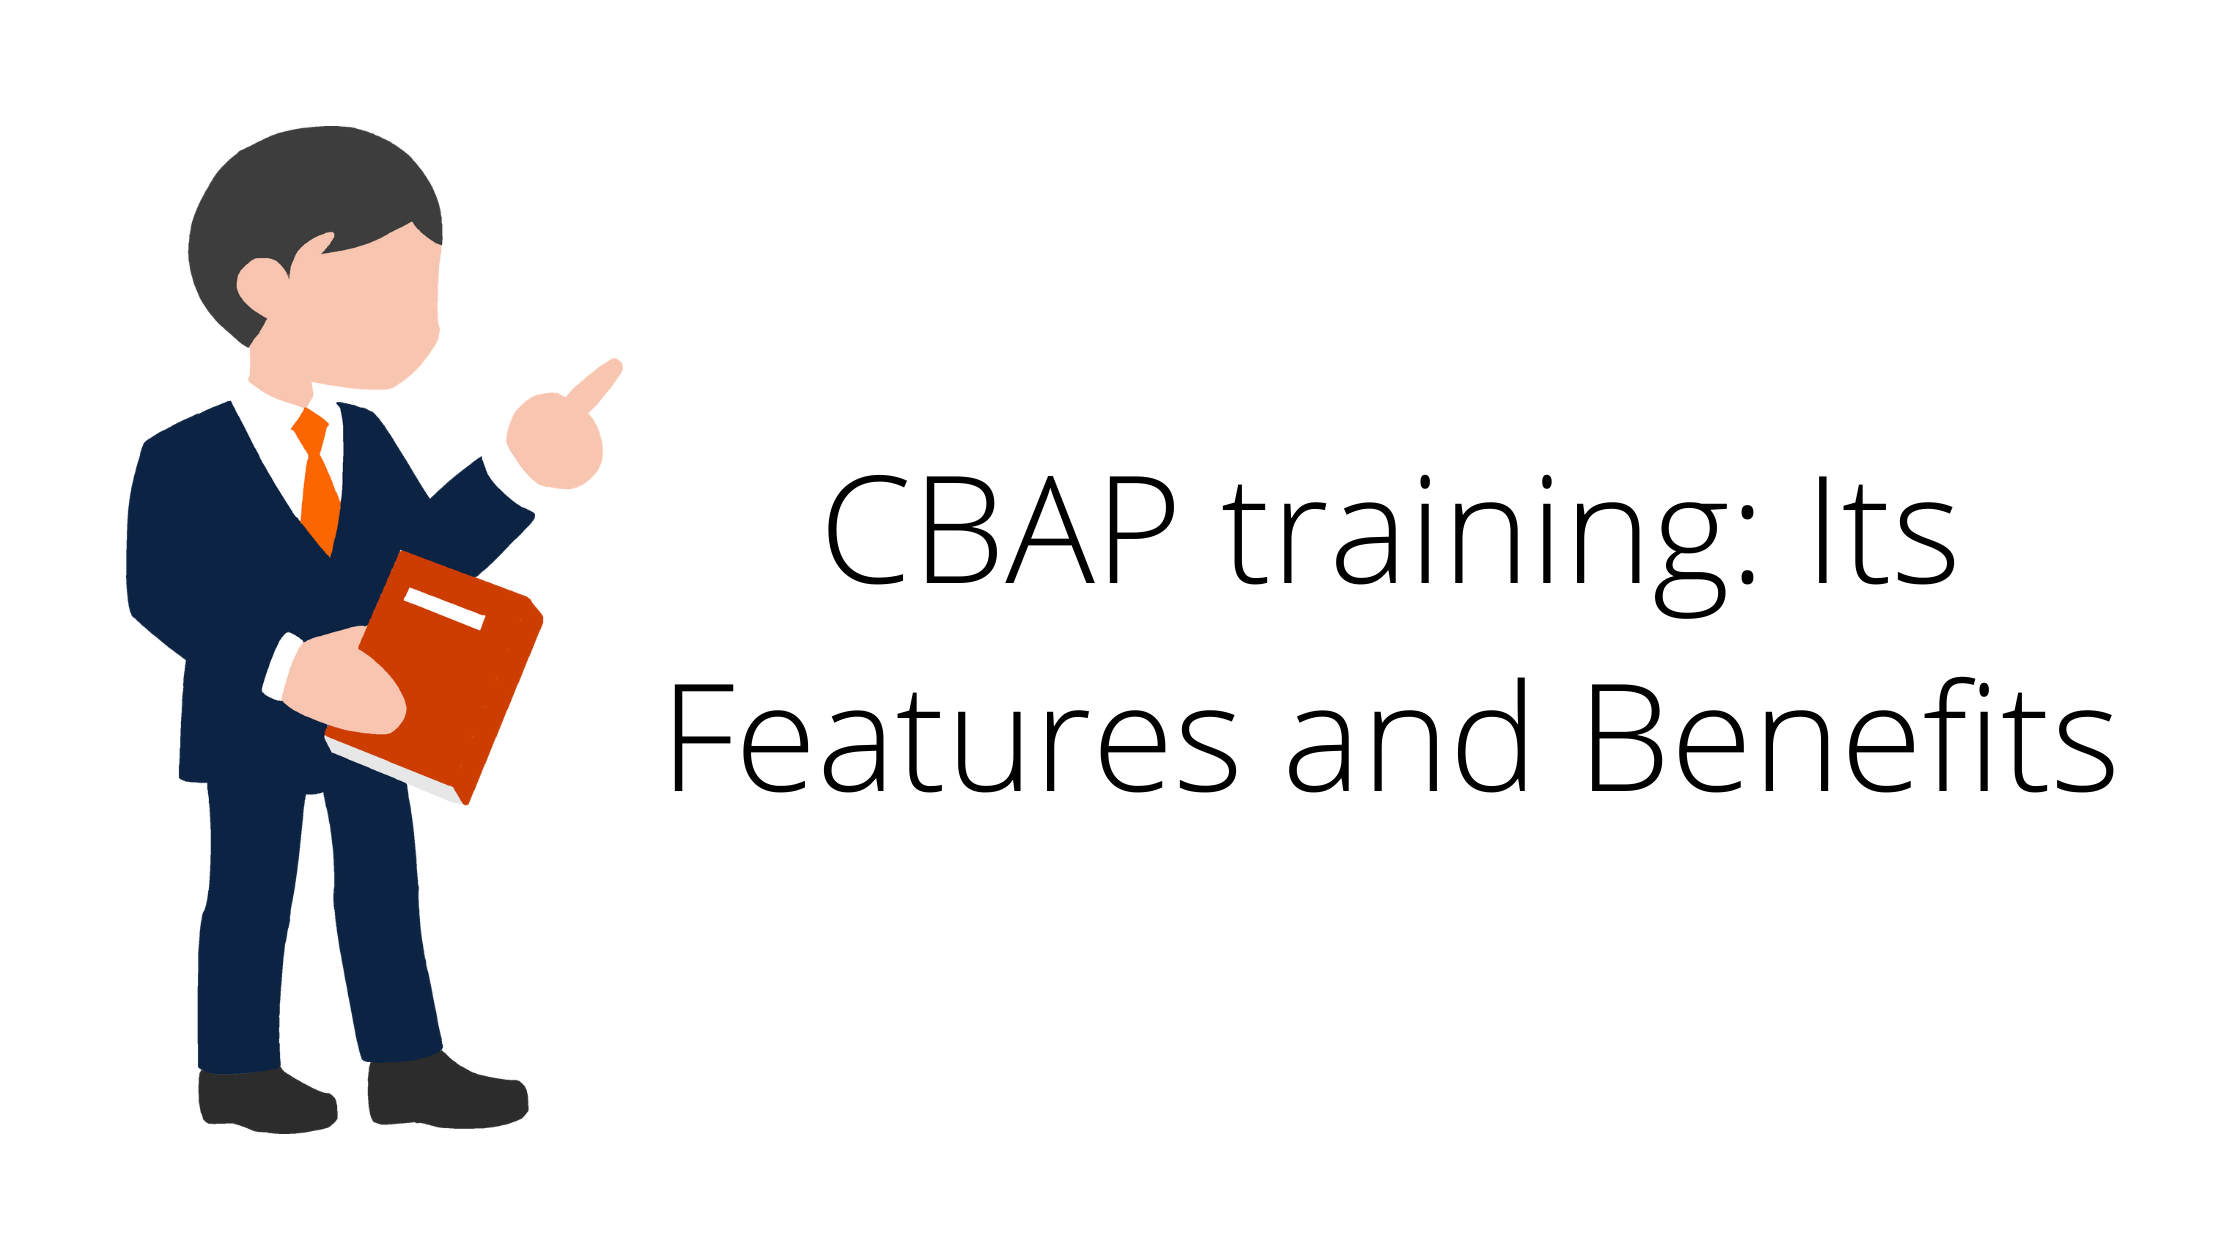 CBAP training: Its Features and Benefits